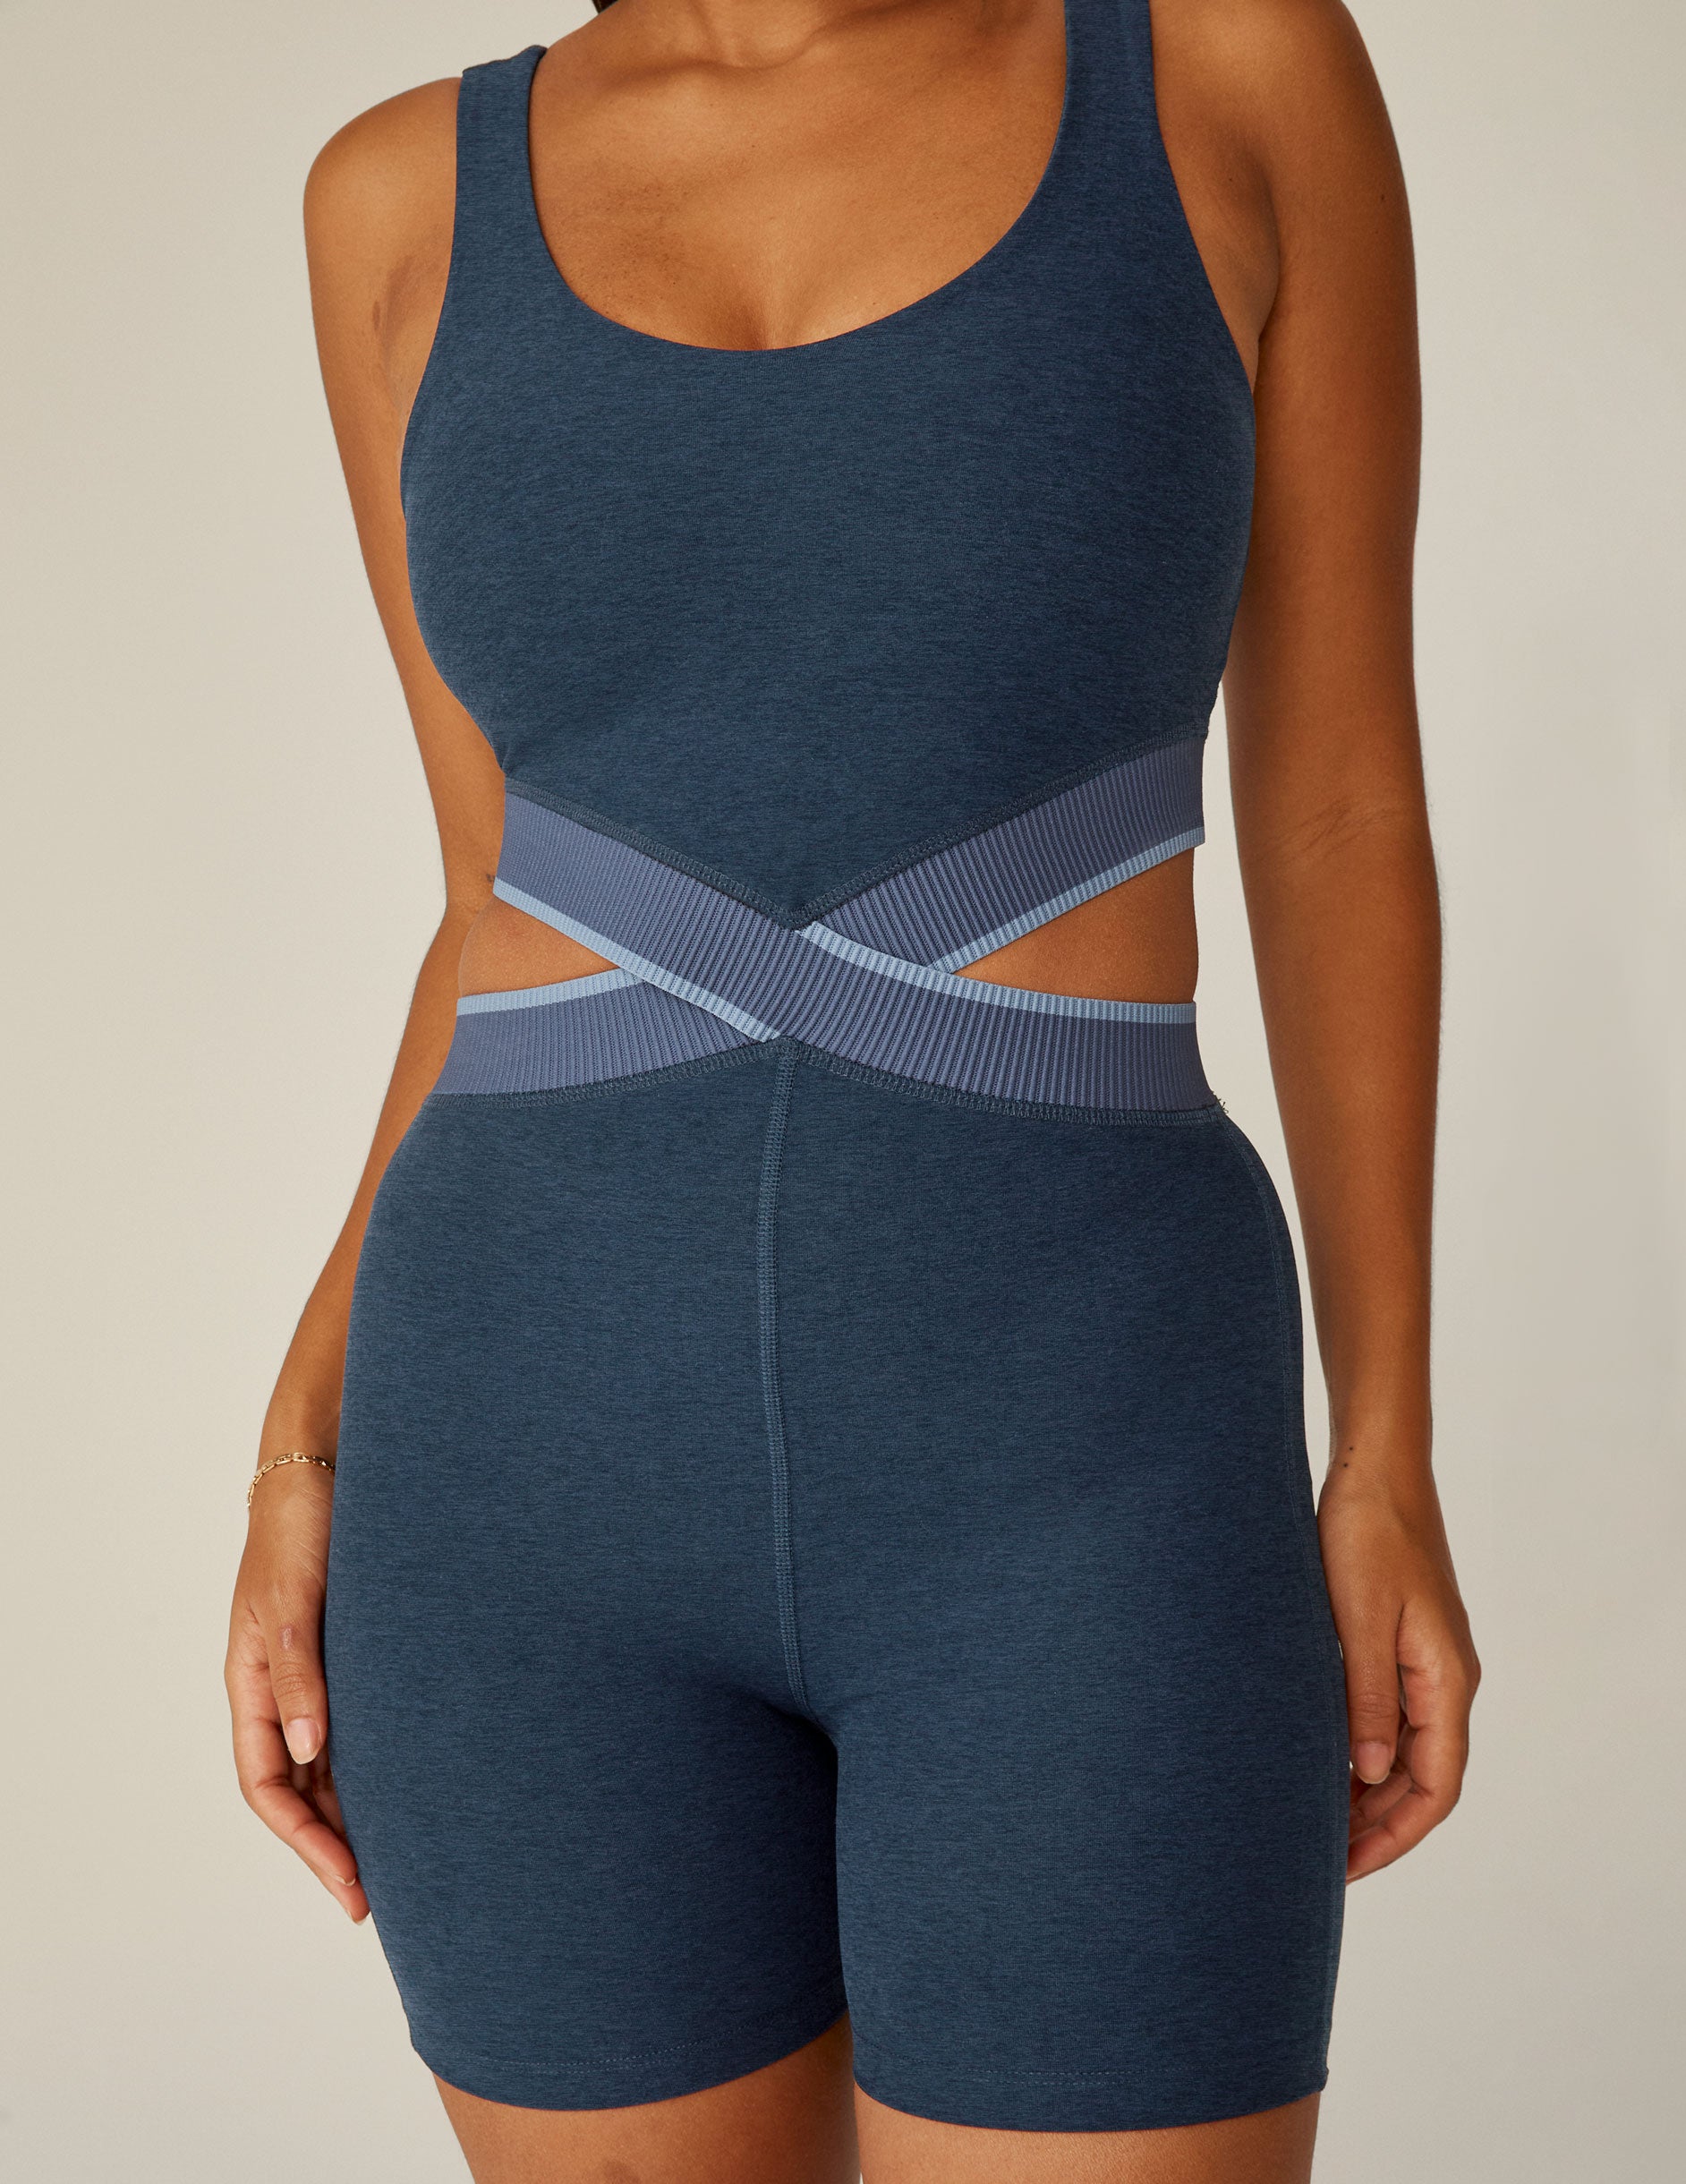 blue v-neck biker jumpsuits with an outline detail at waistband and cutouts on each side of the waistband. 